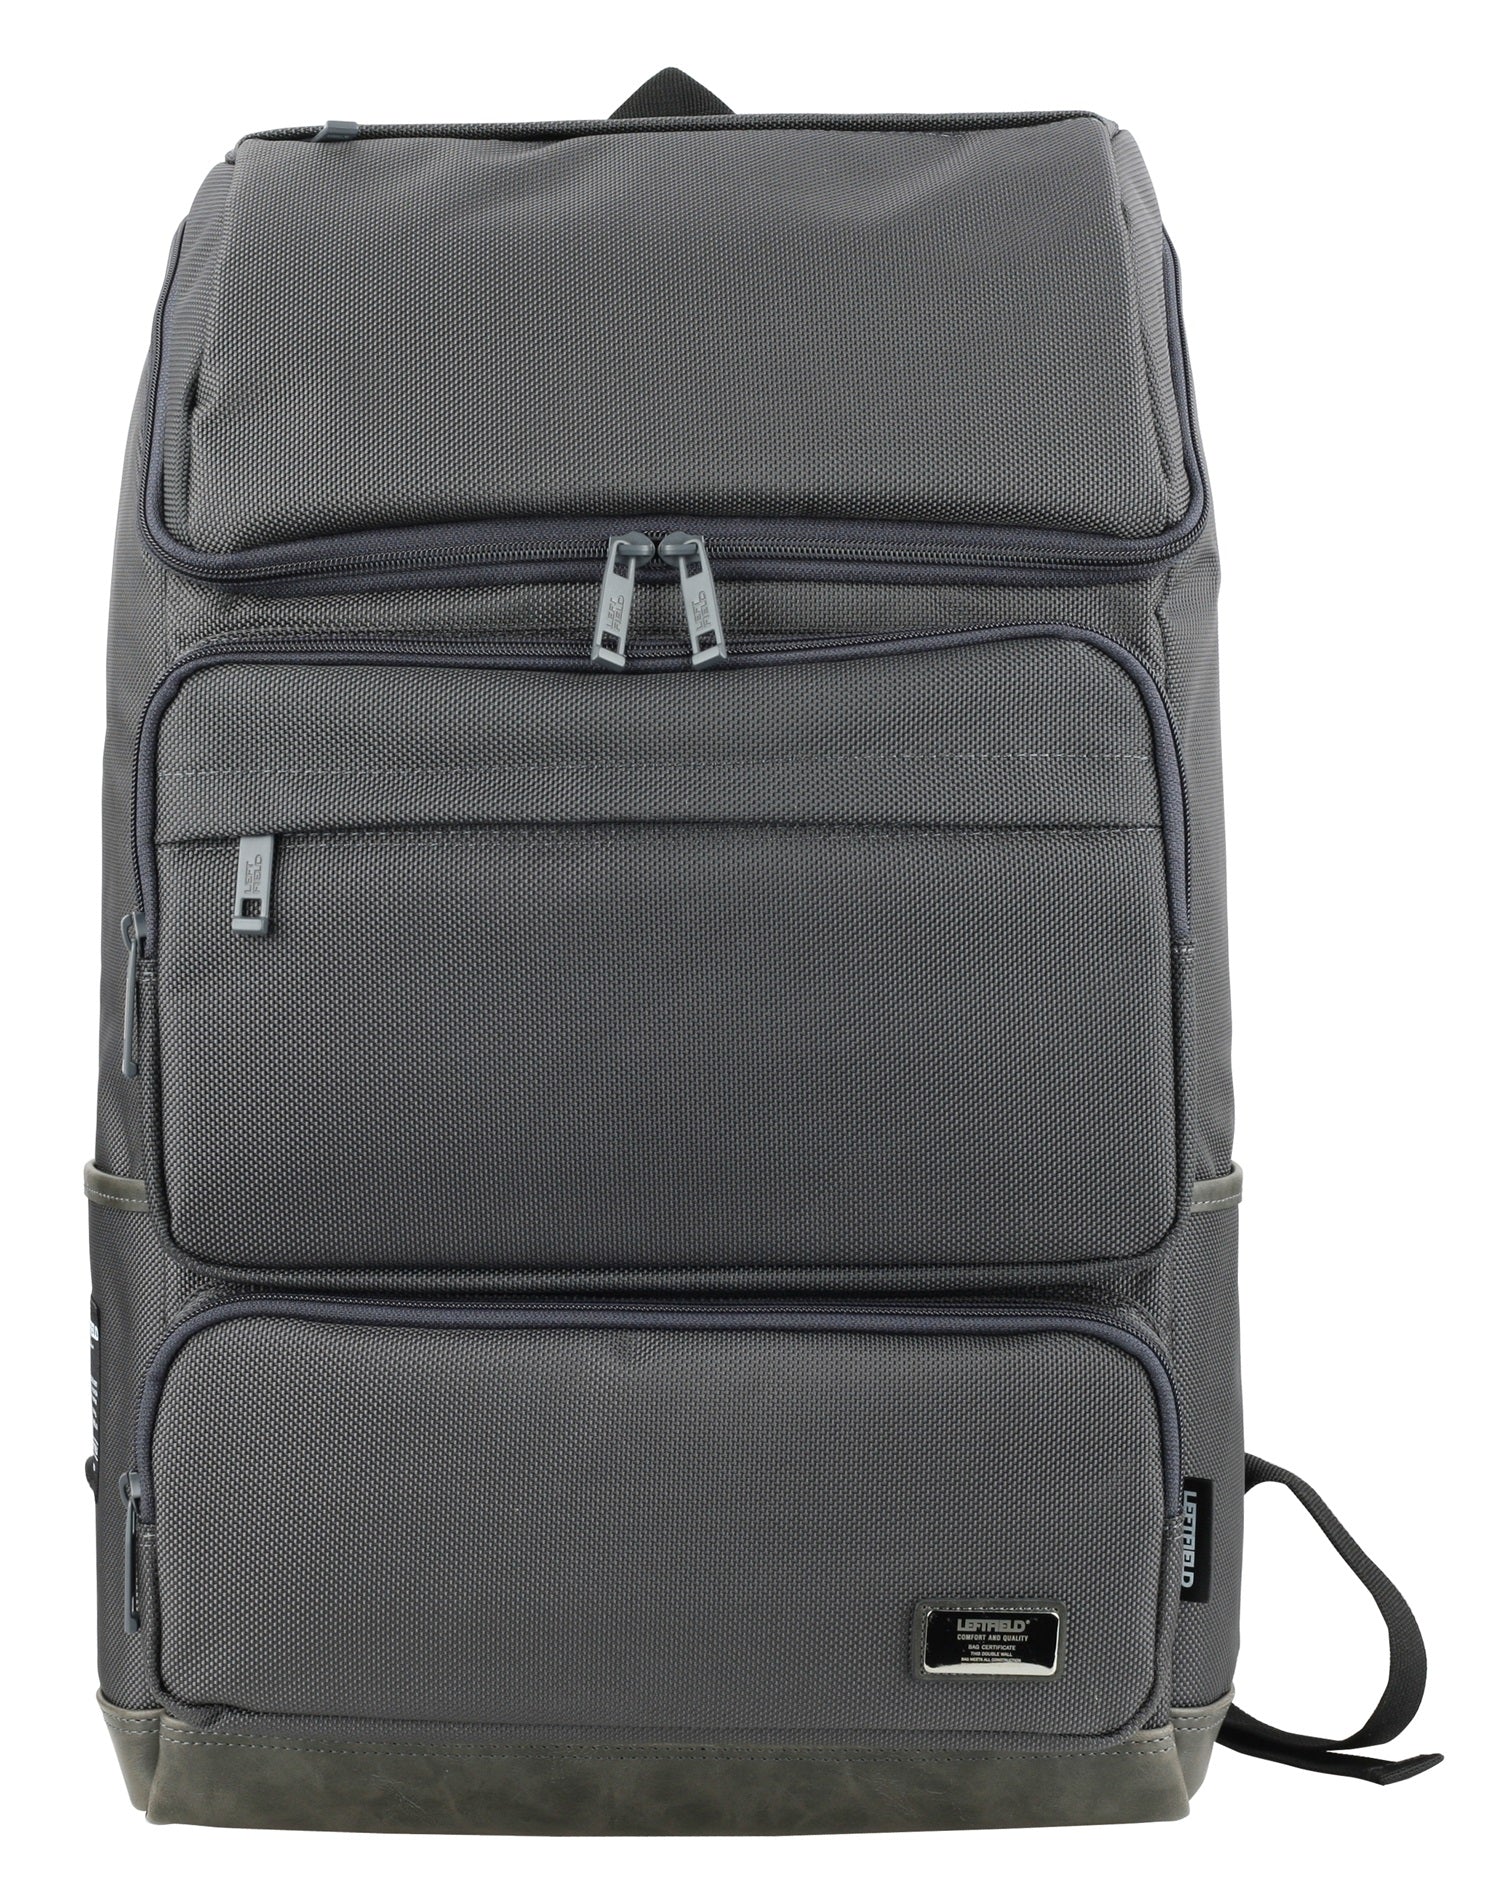 Charcoal Grey Casual Laptop Daypack Travel School Backpacks